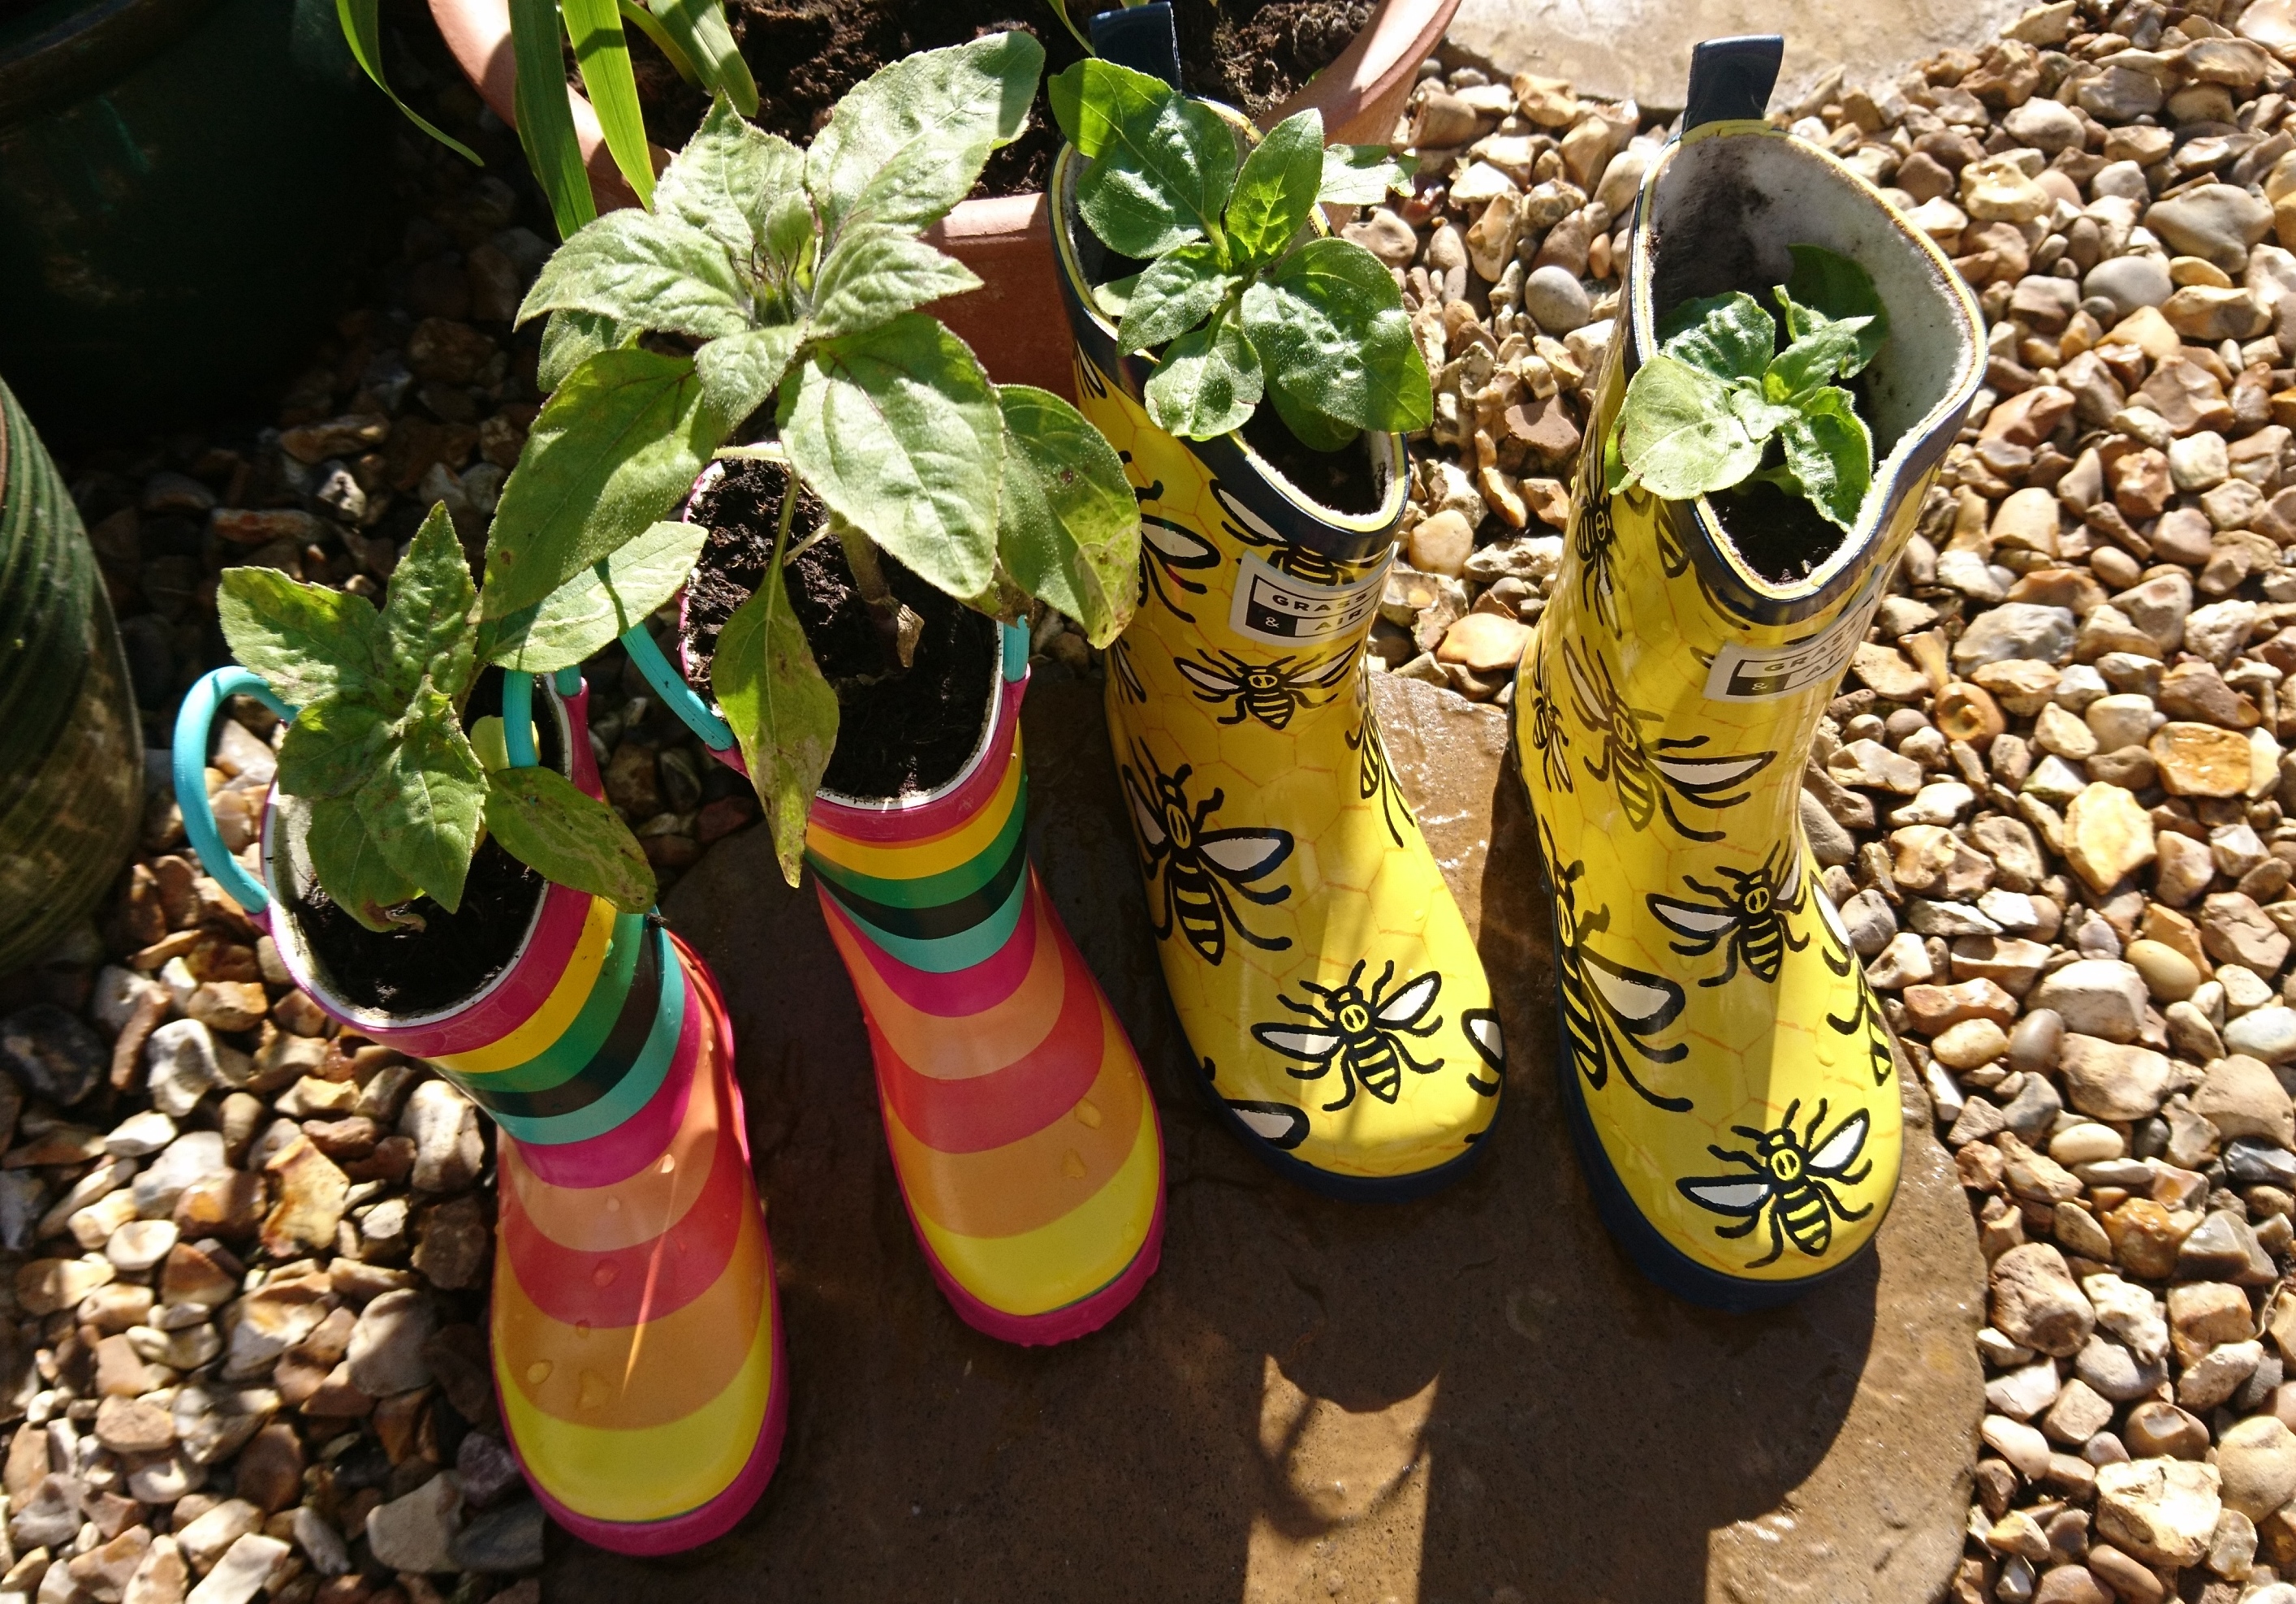 Dwarf sunflowers planted in wellington boots.